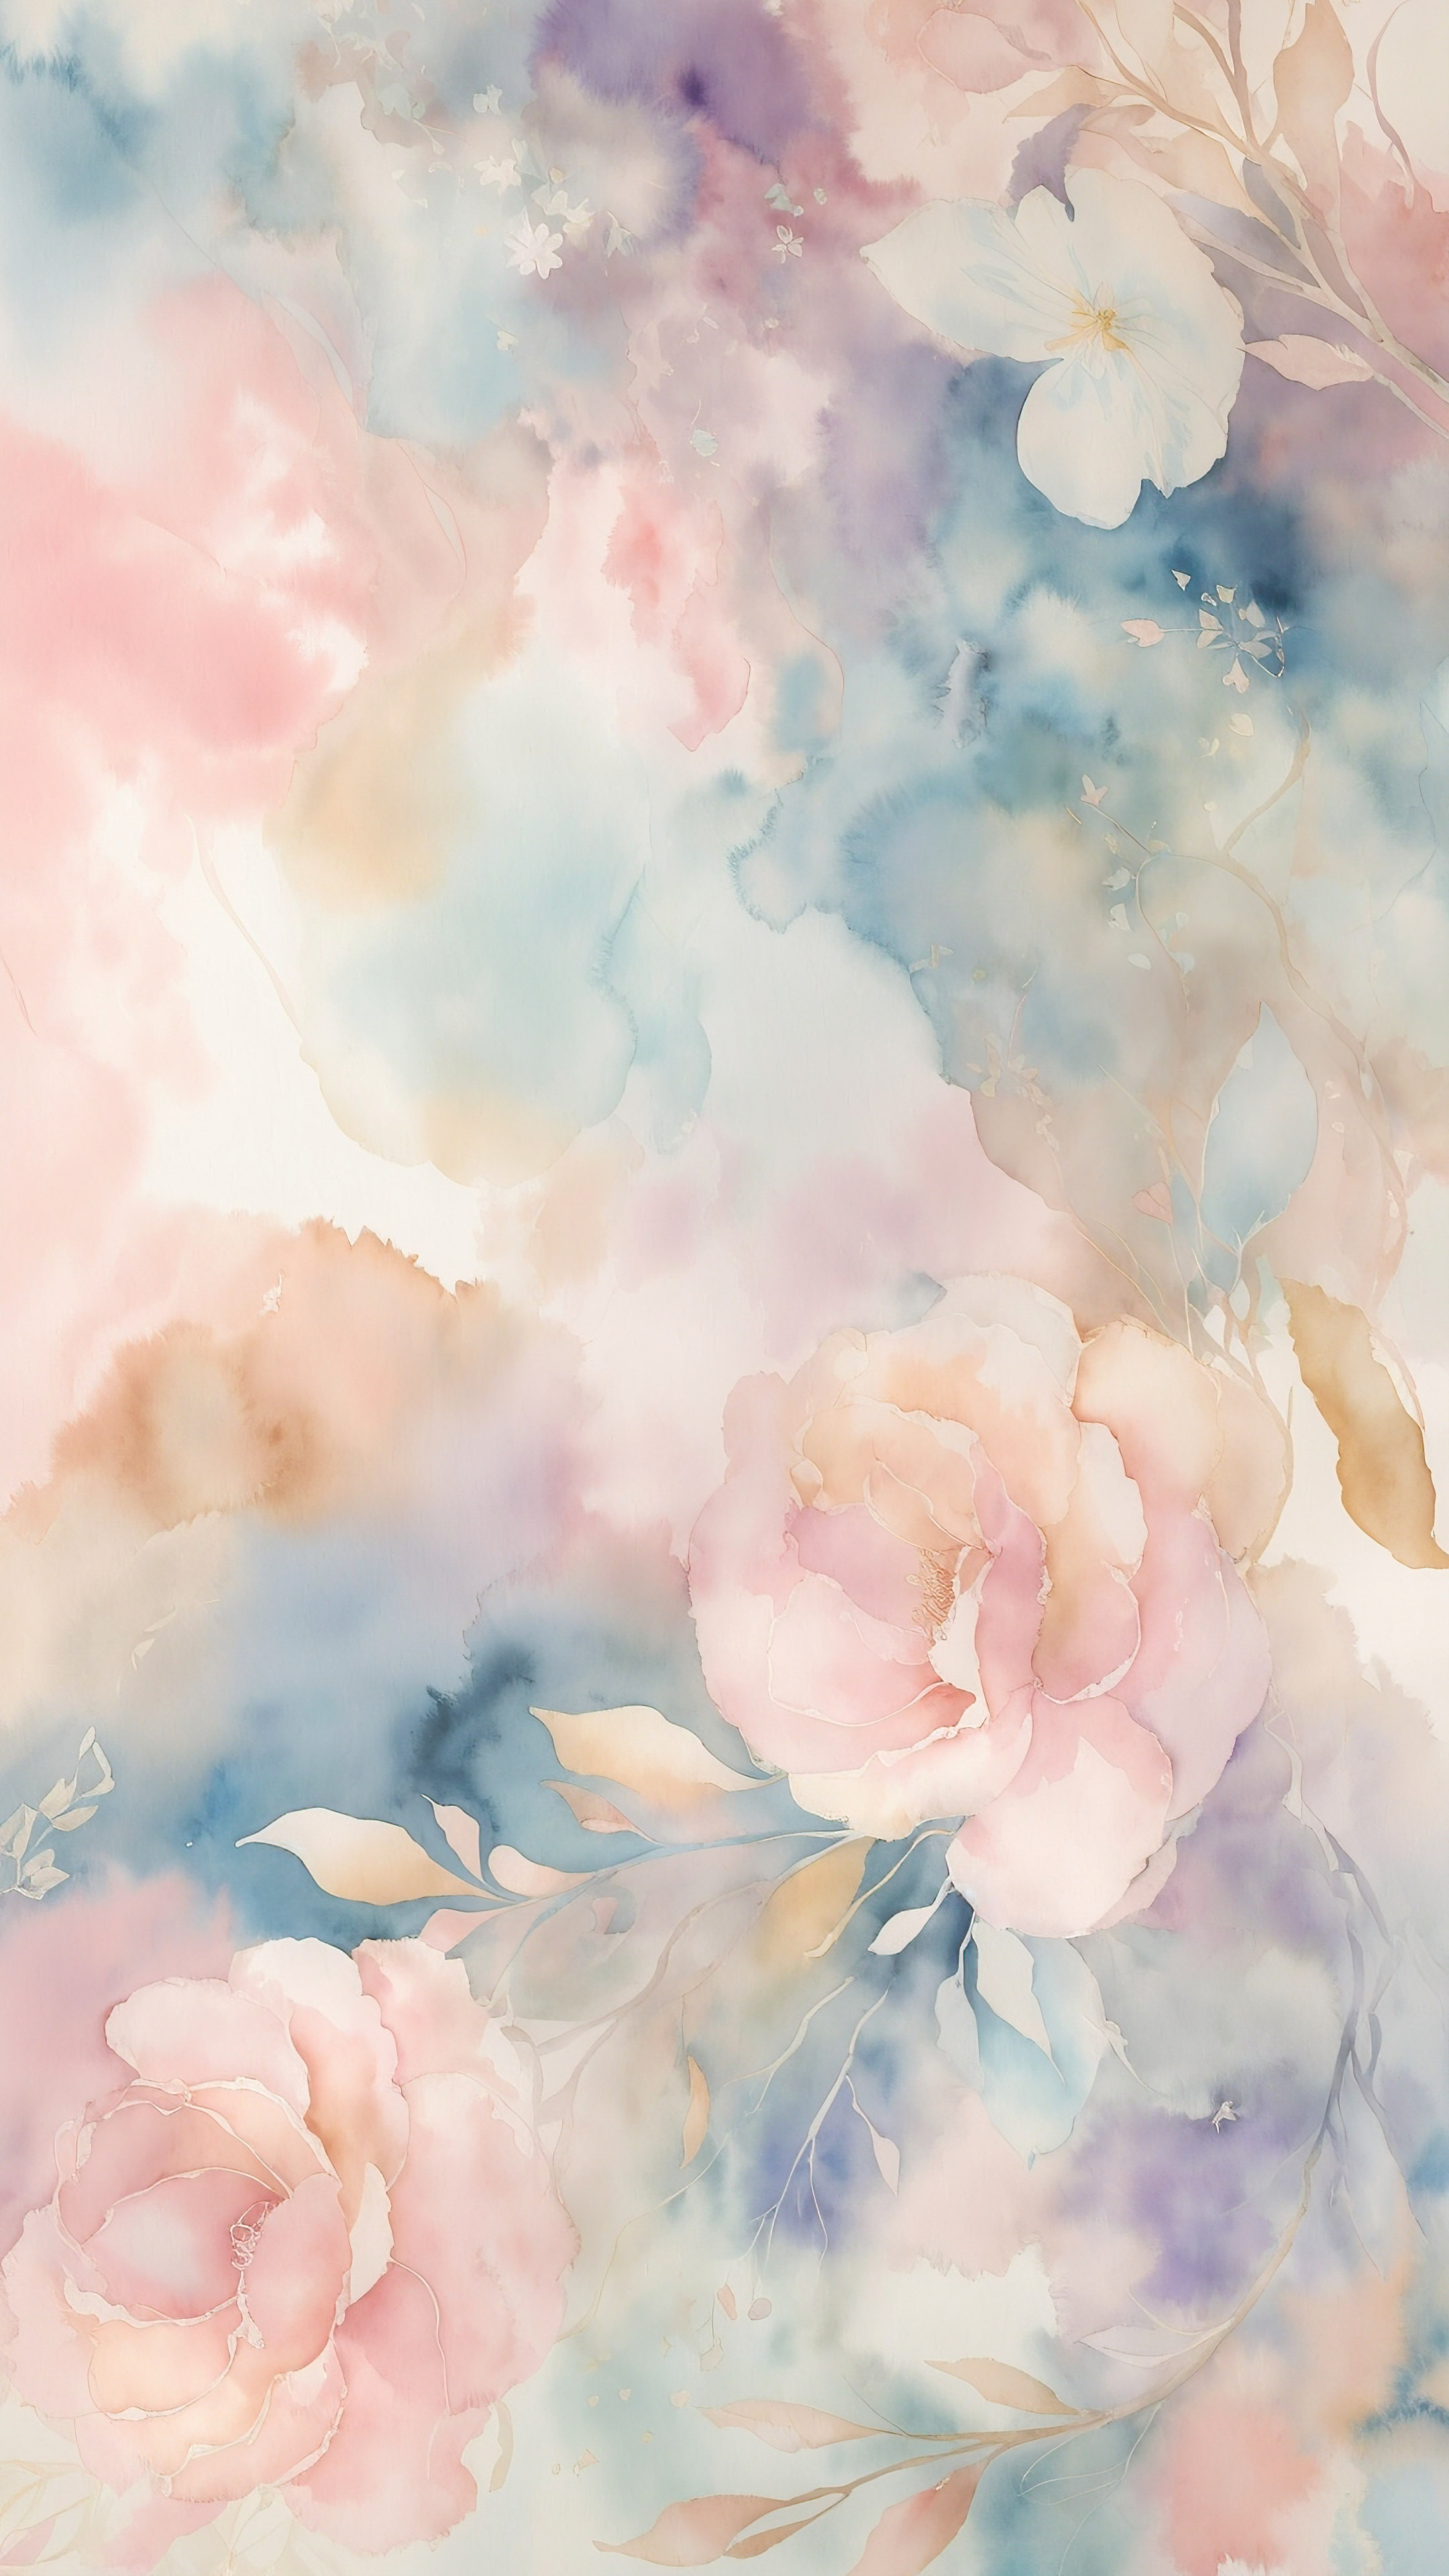 Dive into abstract art wallpaper 4K for Android, showcasing a dreamy watercolor effect with soft pastel tones and gentle brushstrokes.